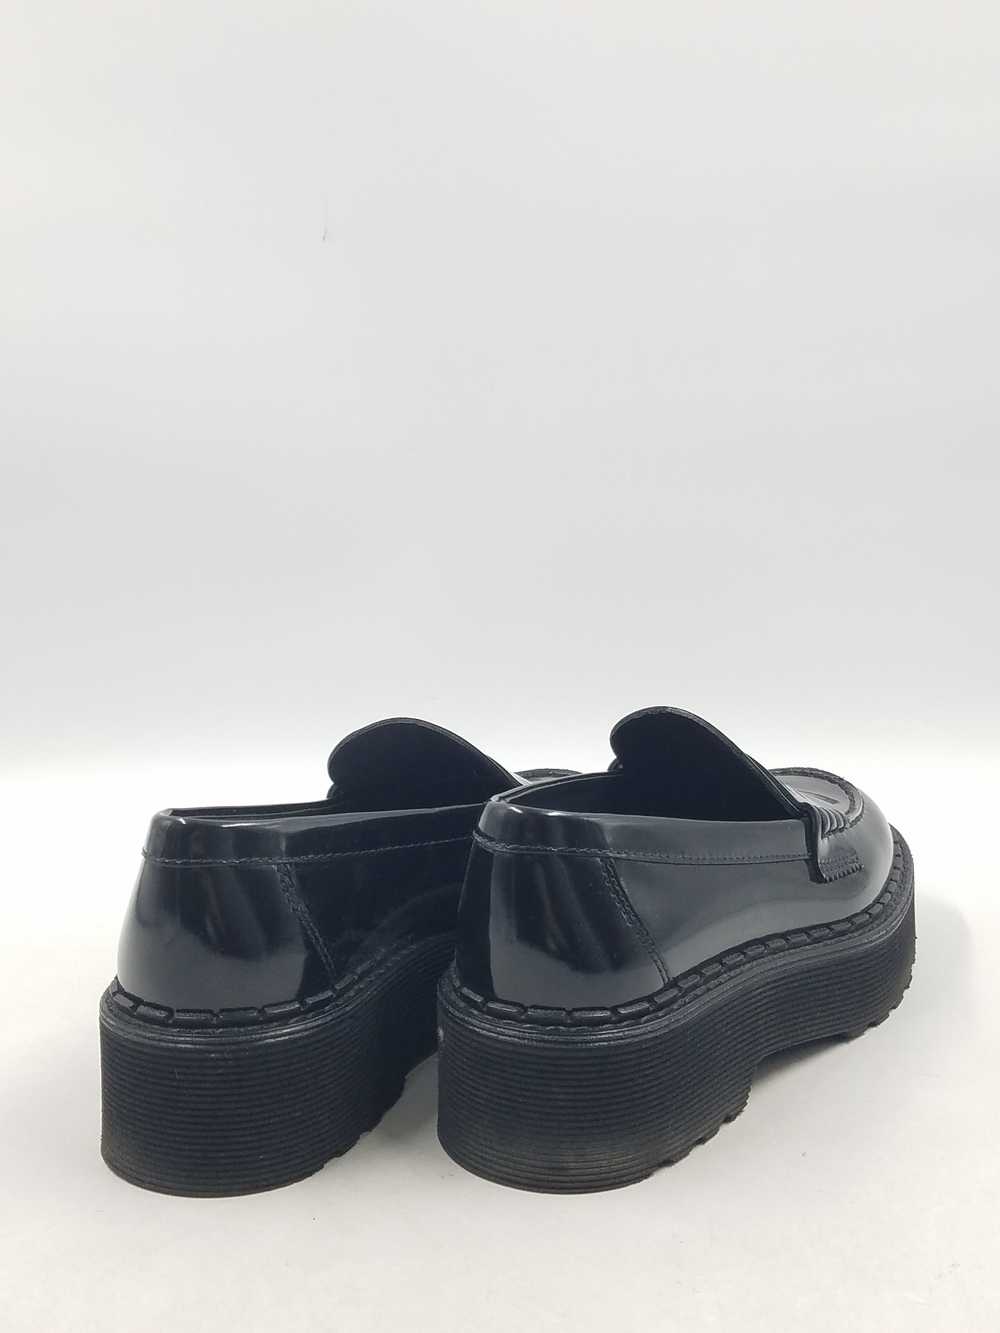 Authentic Tod's Black Platform Penny Loafers W 5.5 - image 4